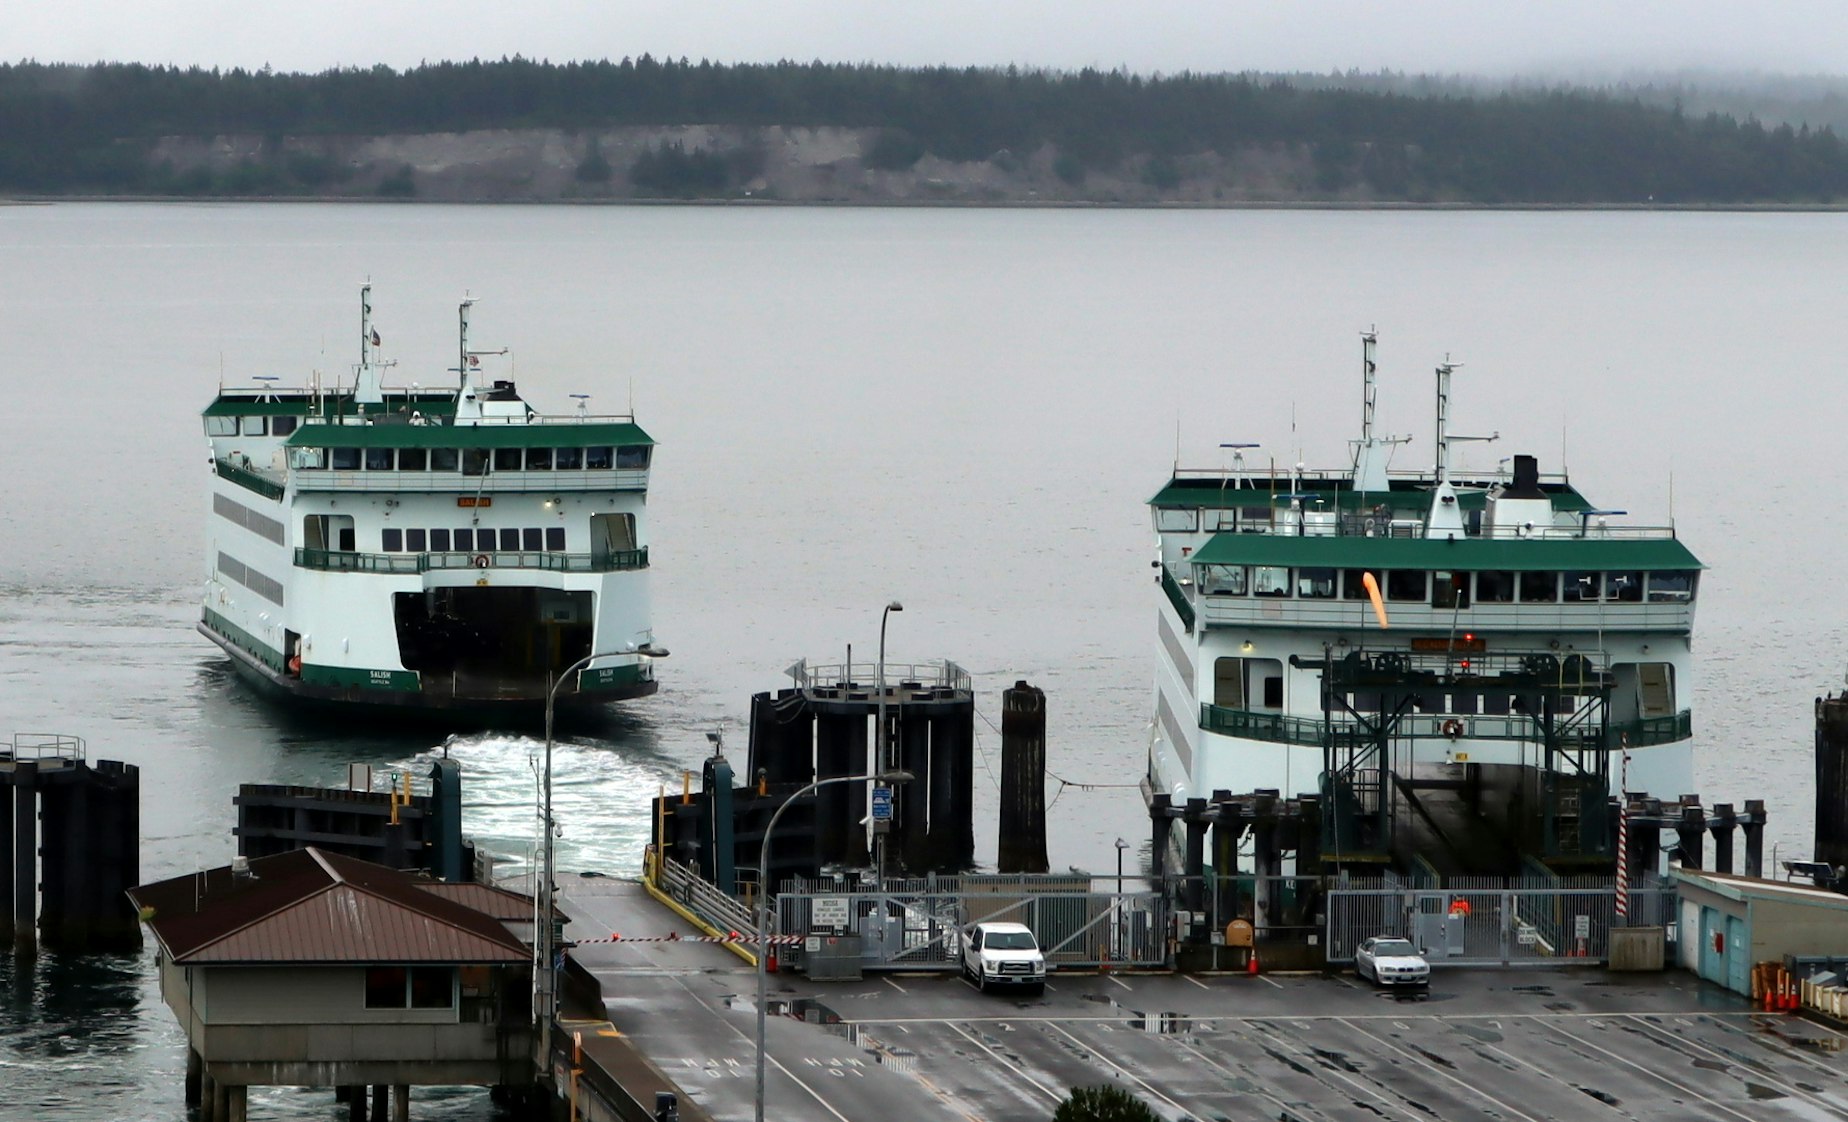 KUOW - Washington State Ferries to stay on reduced schedule as summer